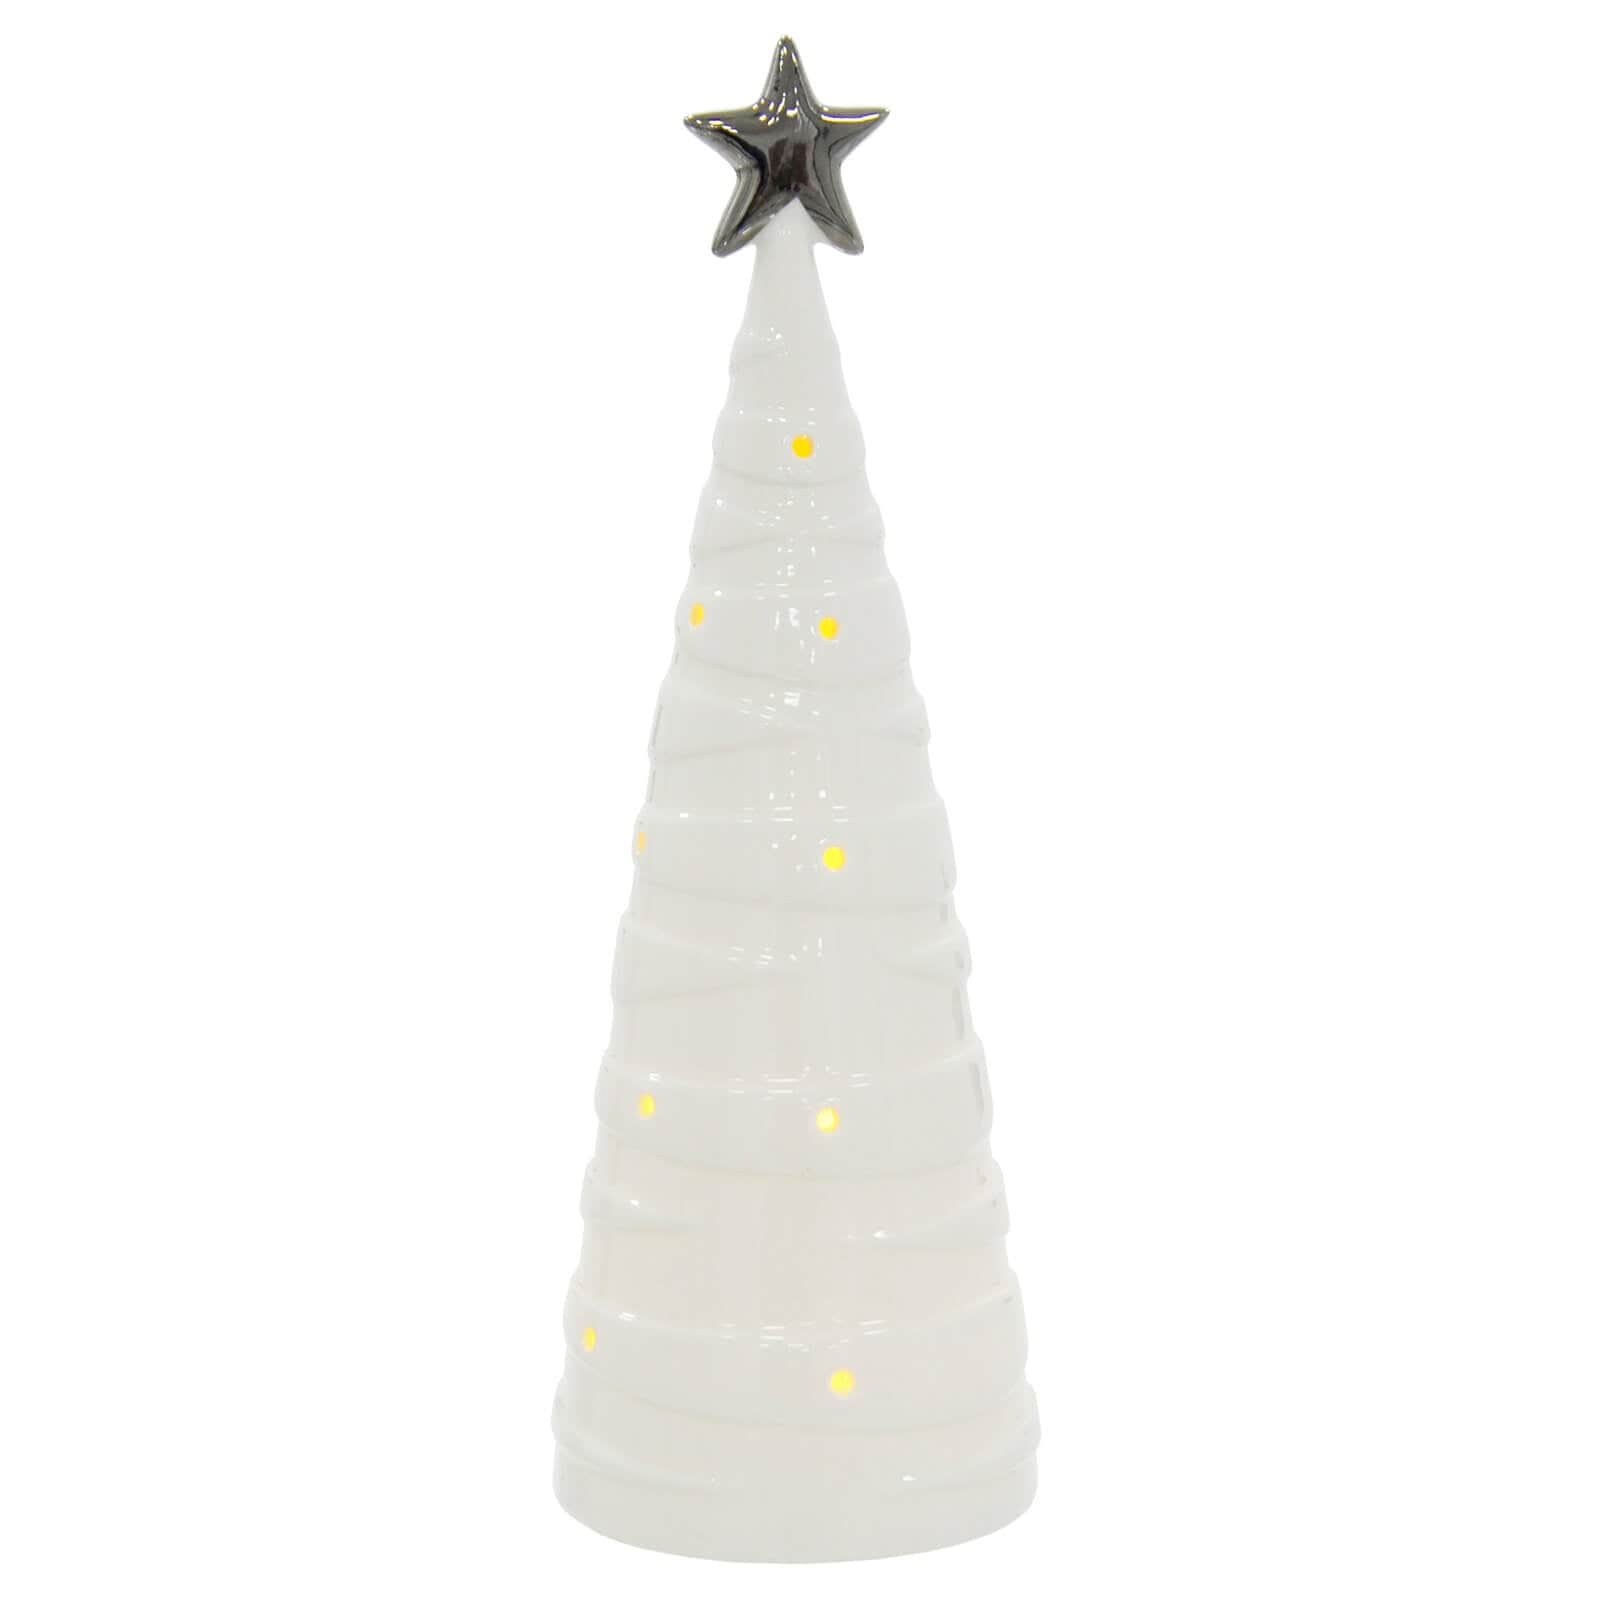 White ceramic Christmas tree shape ornament with warm white LED light shining through cut away baubles and topped with a silver star